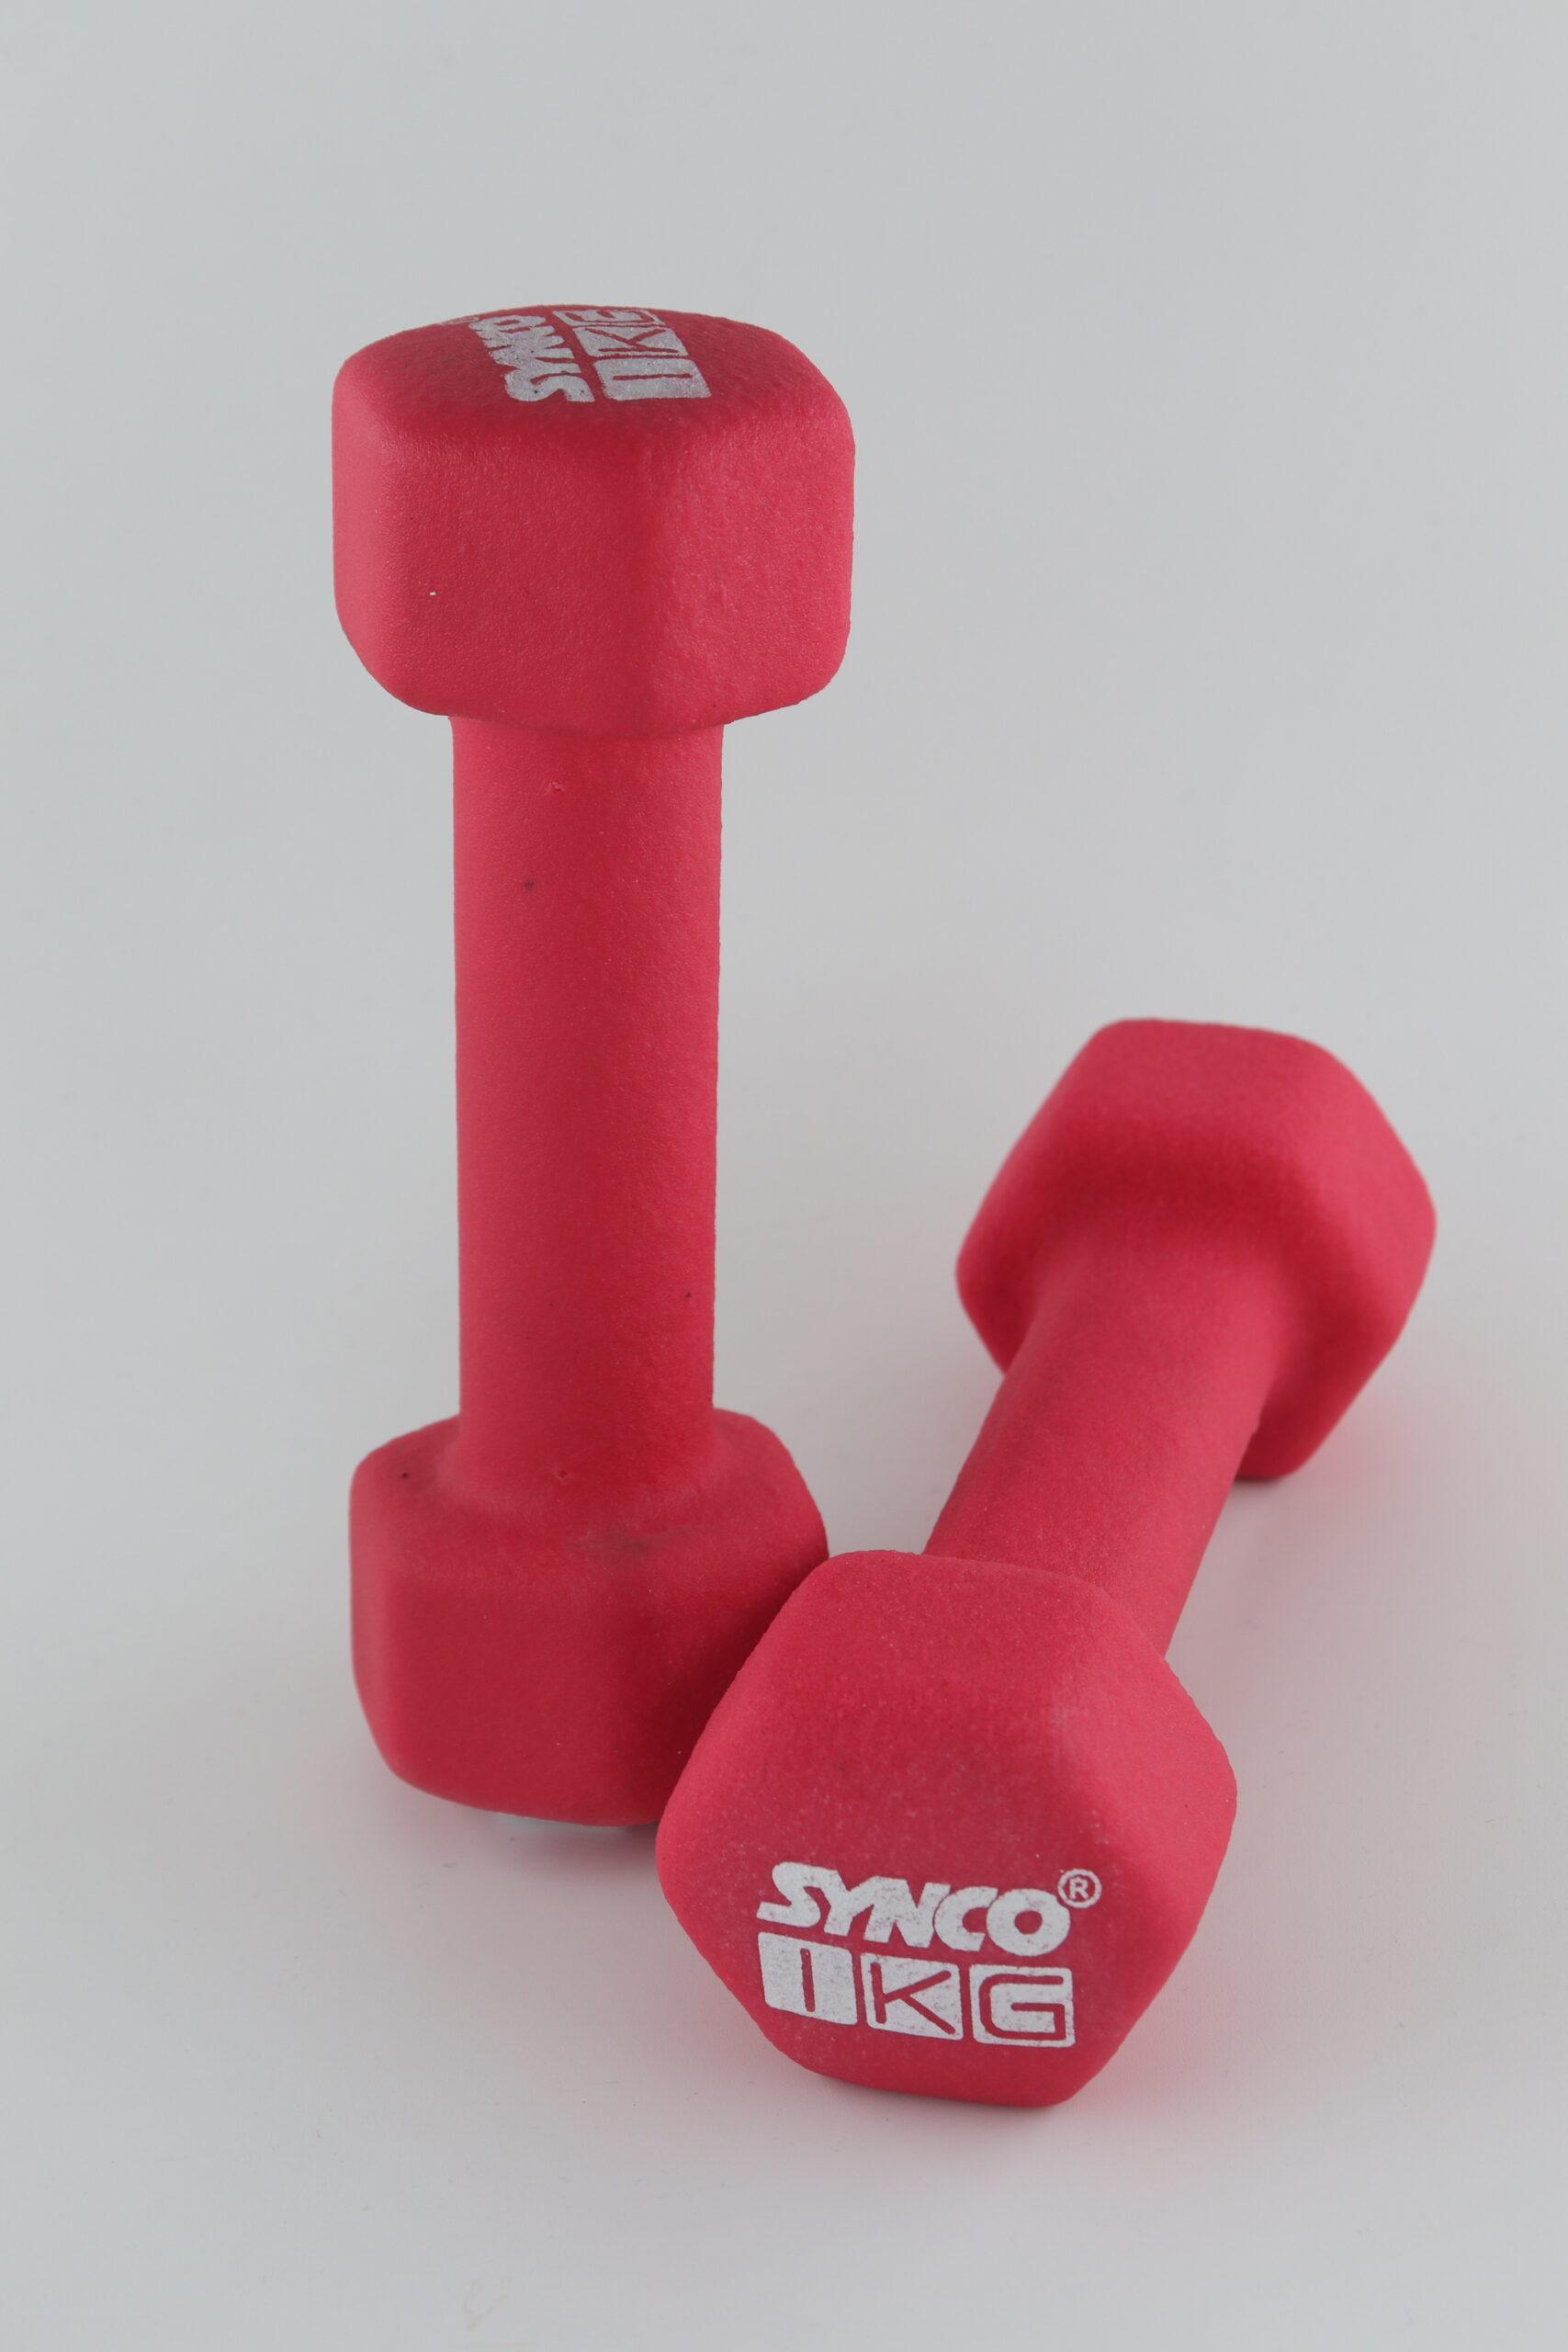 Synco Red Dumbbell Pair ( 2 x 1 KG) - 4